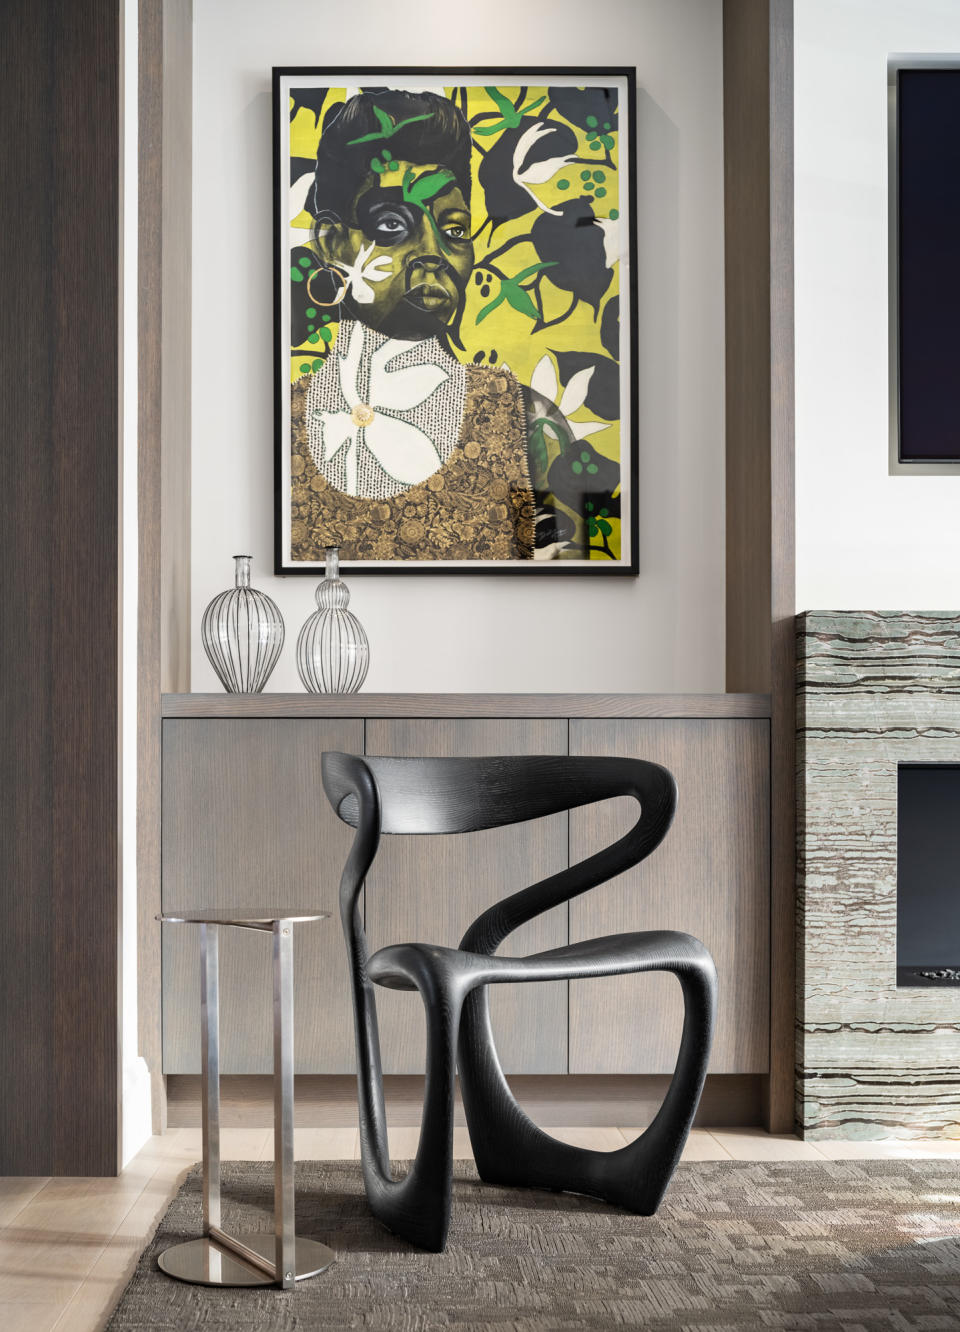 A grey living room with yellow, green and black artwork and a single black wood armchair